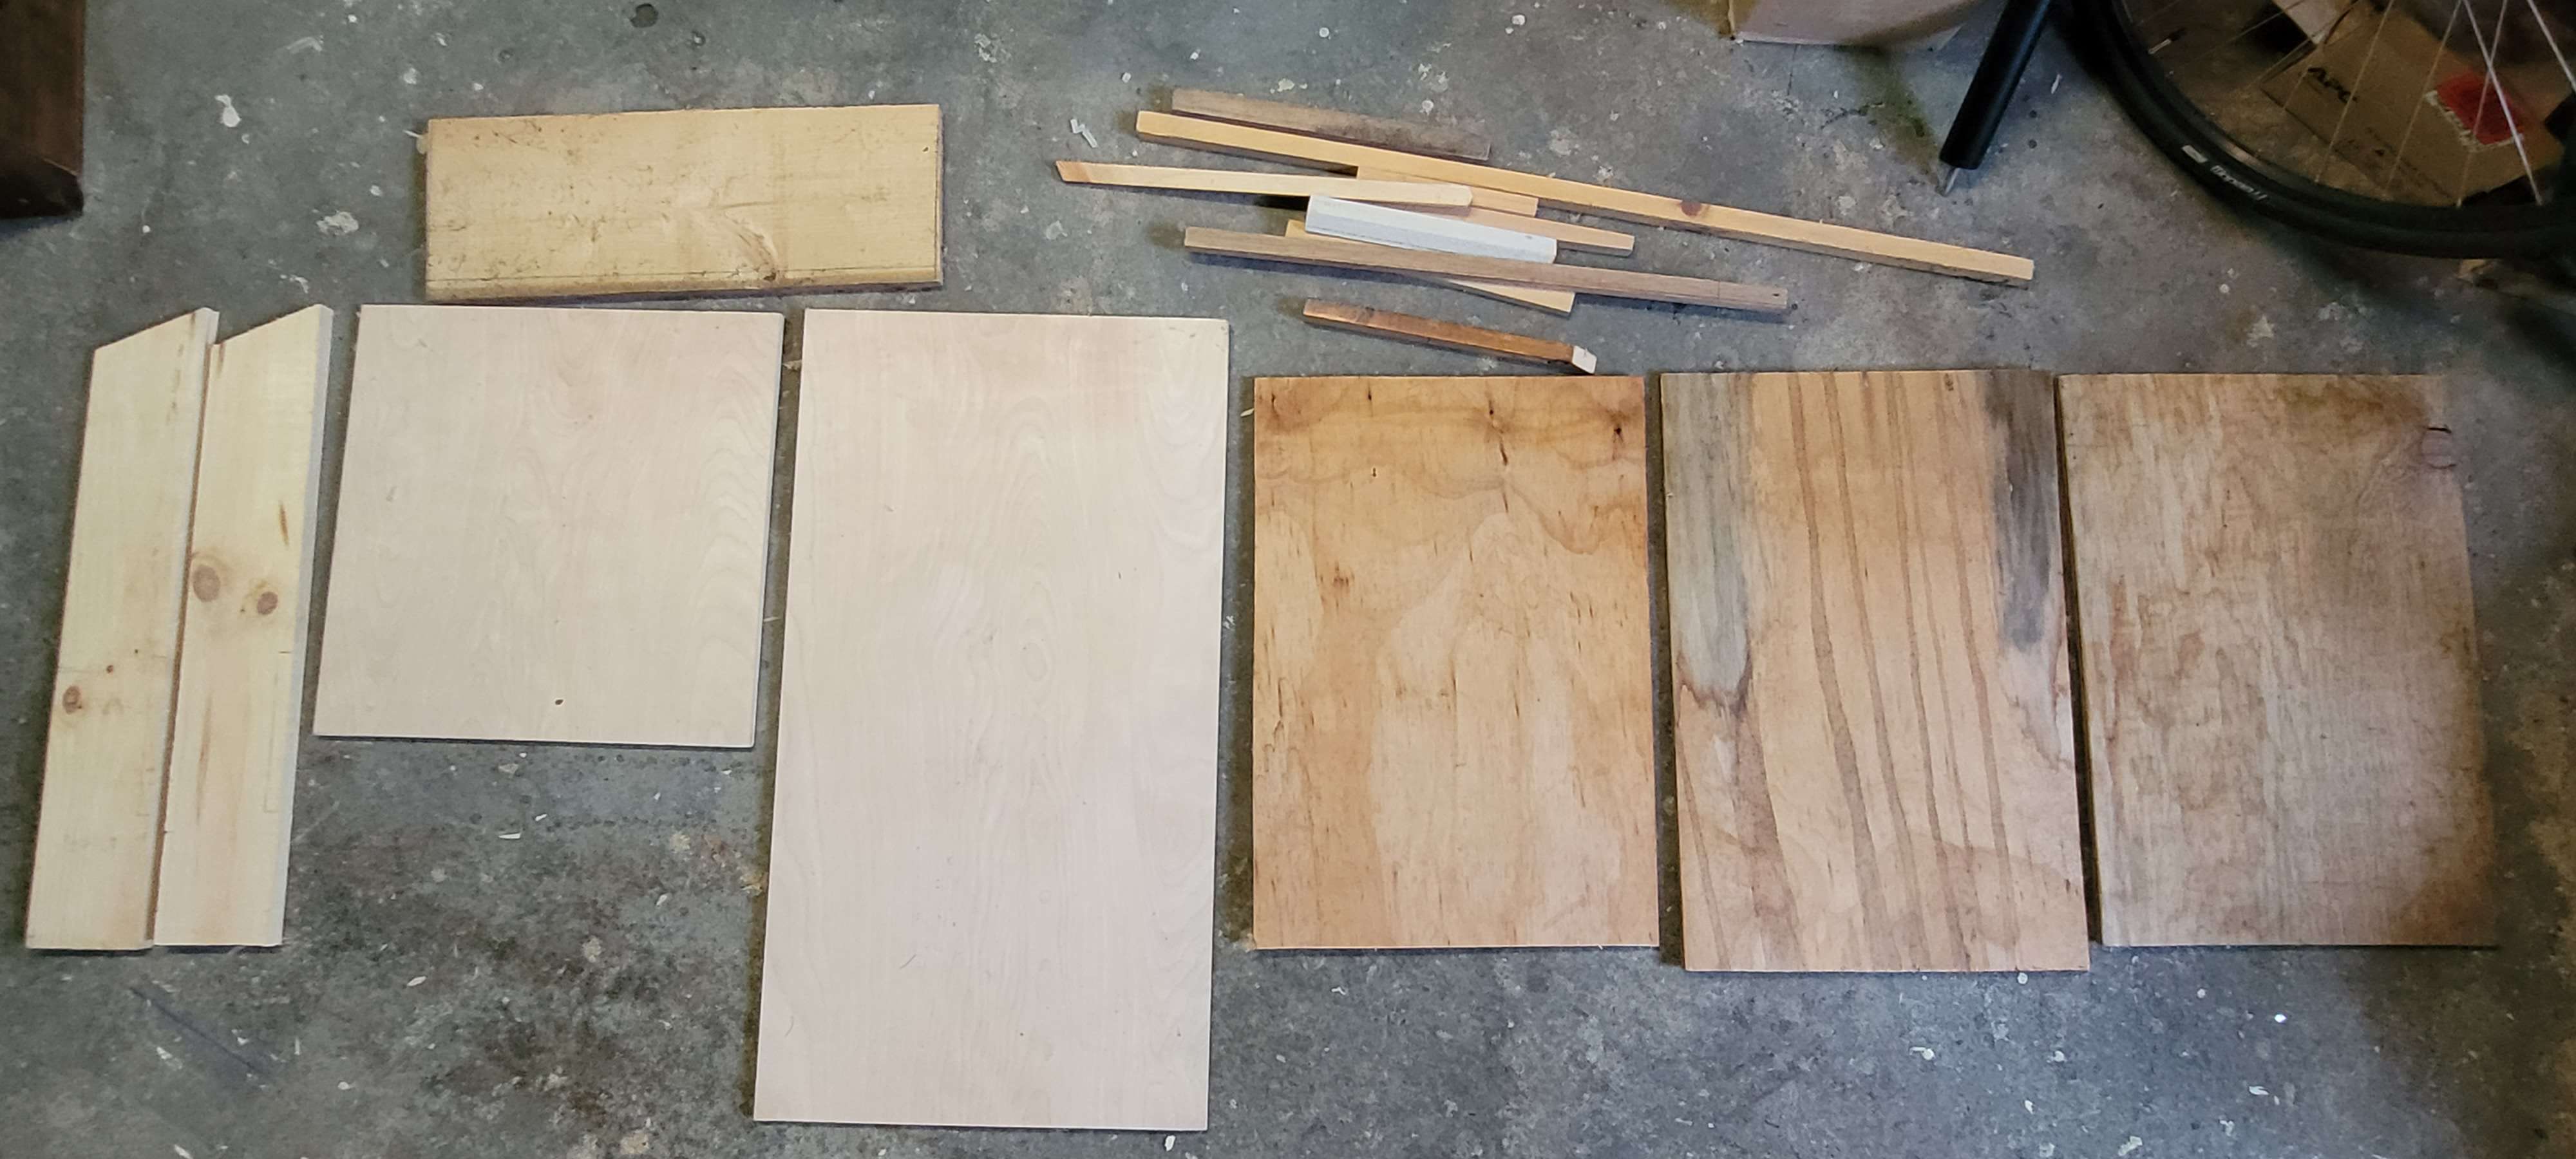 the pieces, early fabrication, most of them are cut to size but not ready for assembly yet